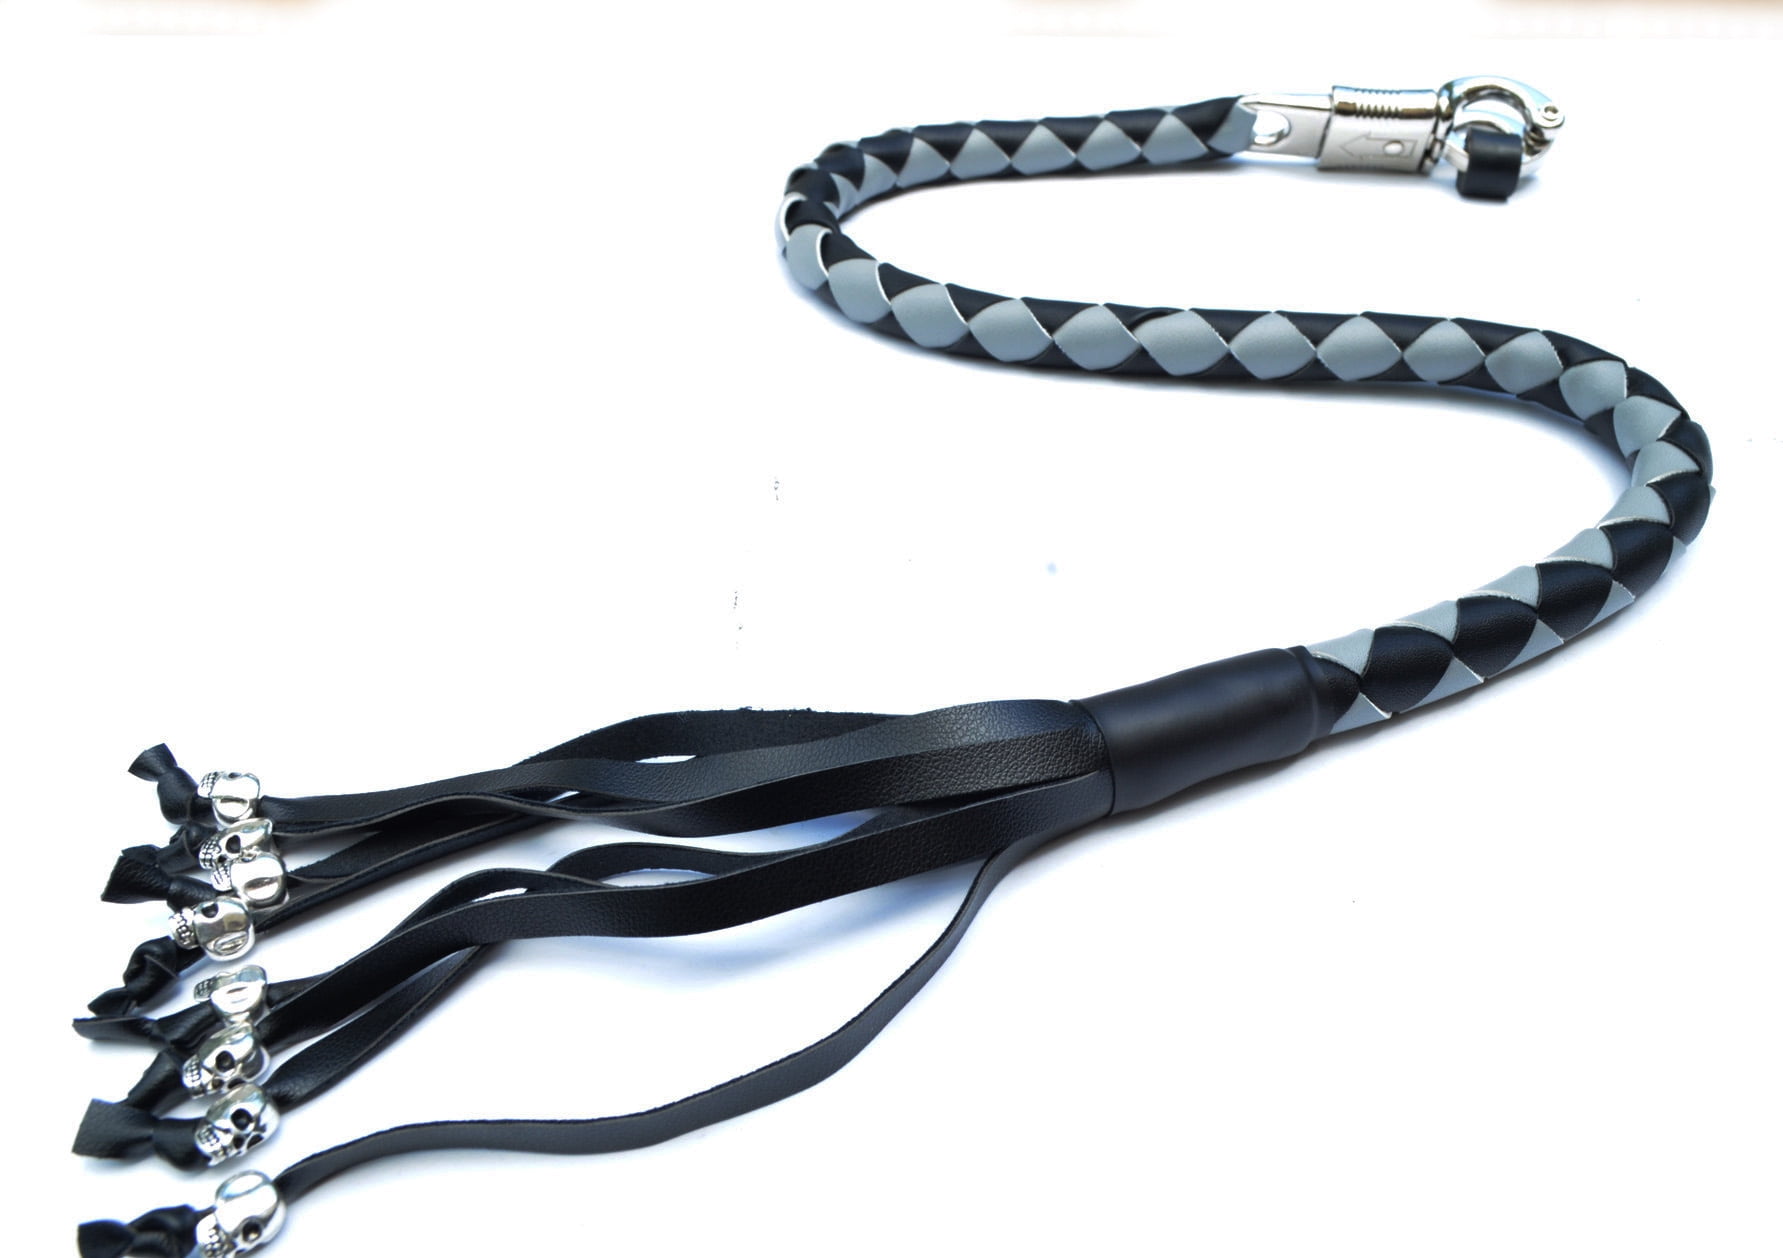 PU Leather Motorcycle Whip Get Back whip with Skull Tassels 36" GRAY / BLACK - Walmart.com